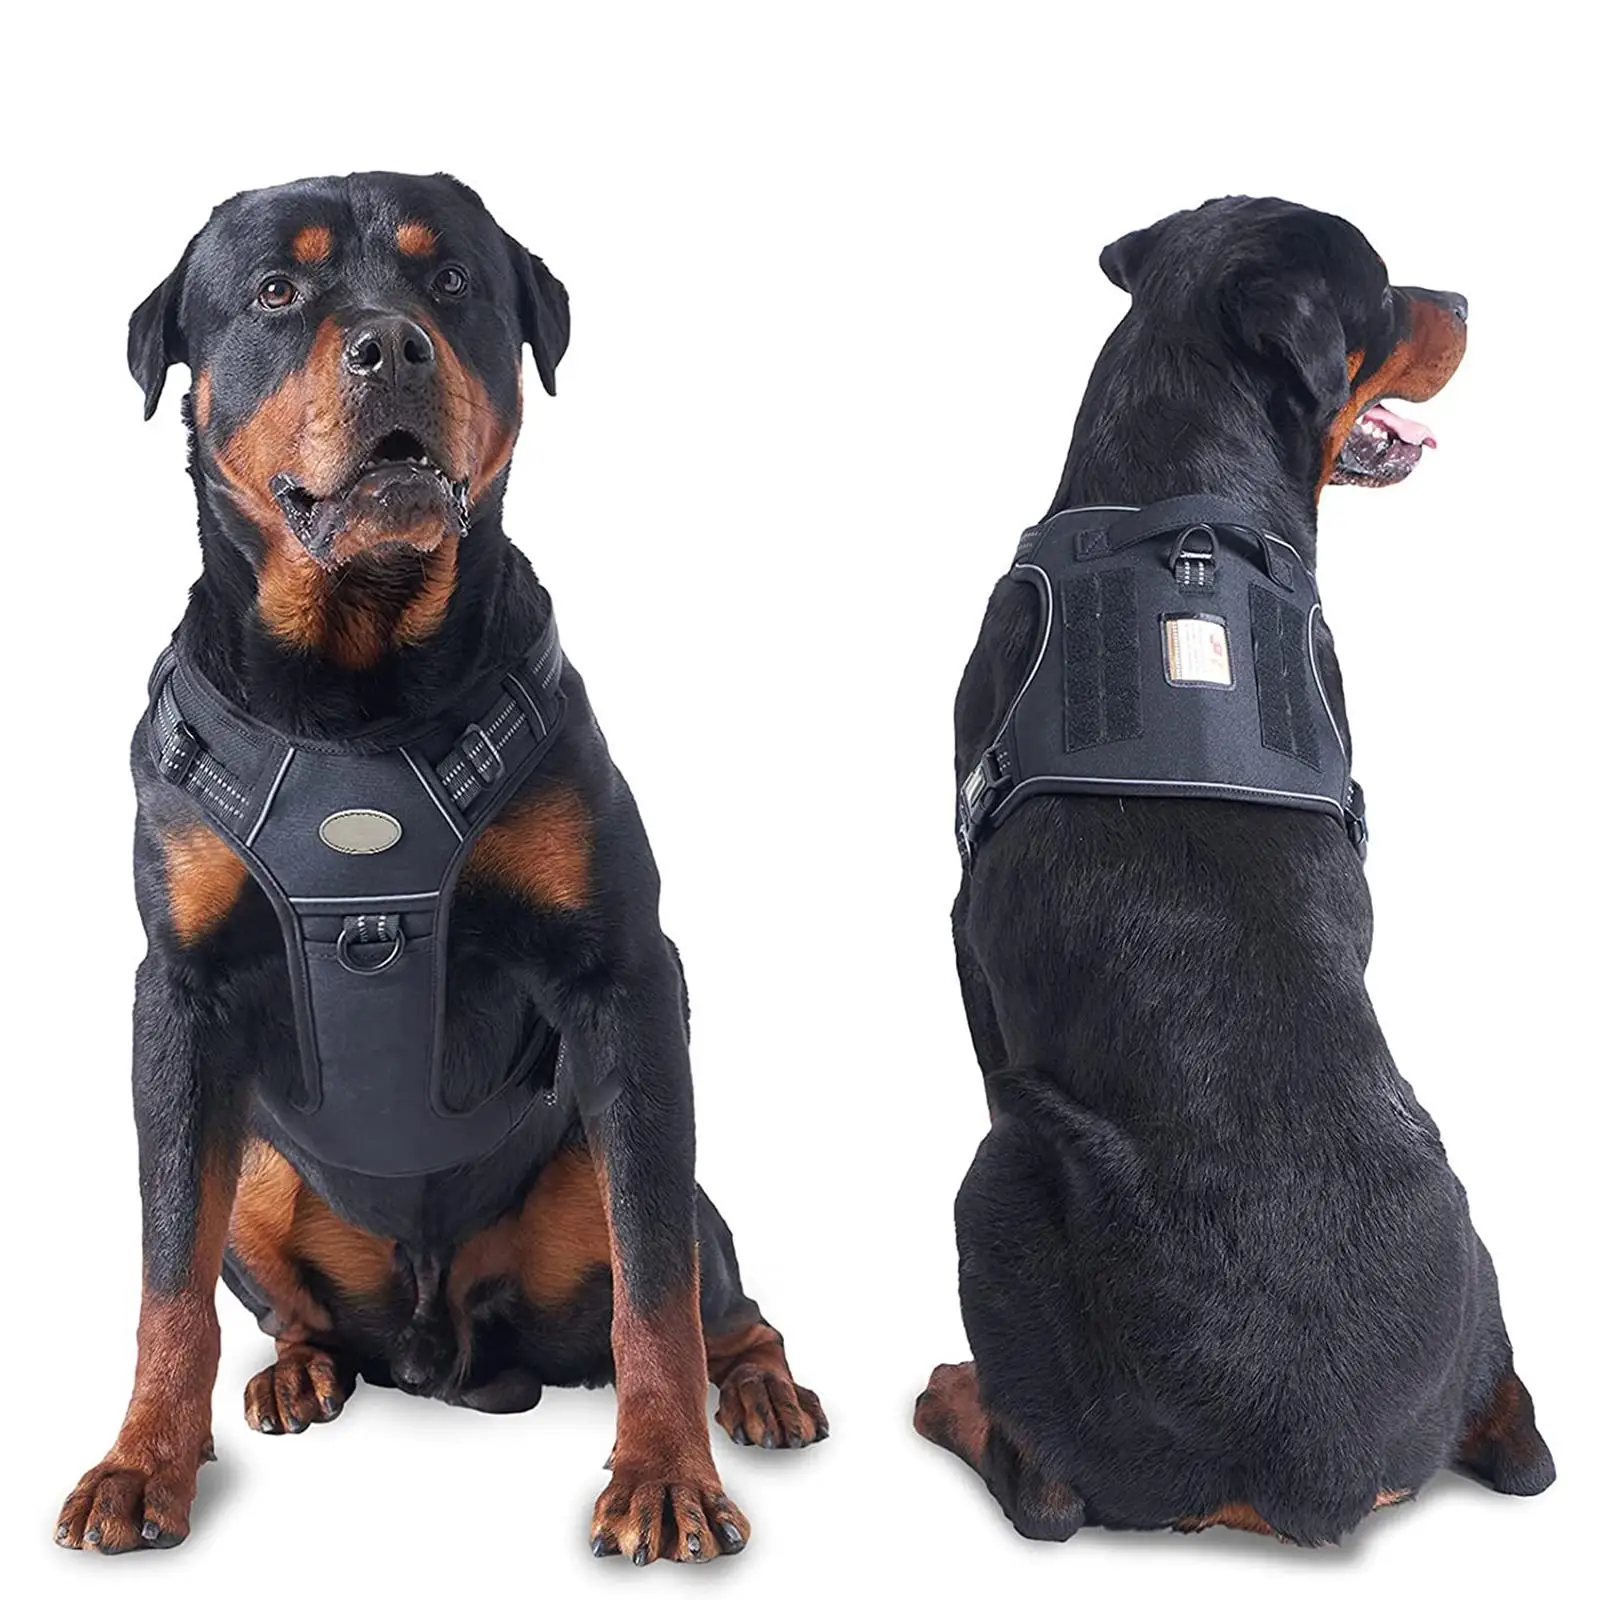 Reflective Training Dog Harness Comfortable for Small to Large Dogs Night Walking